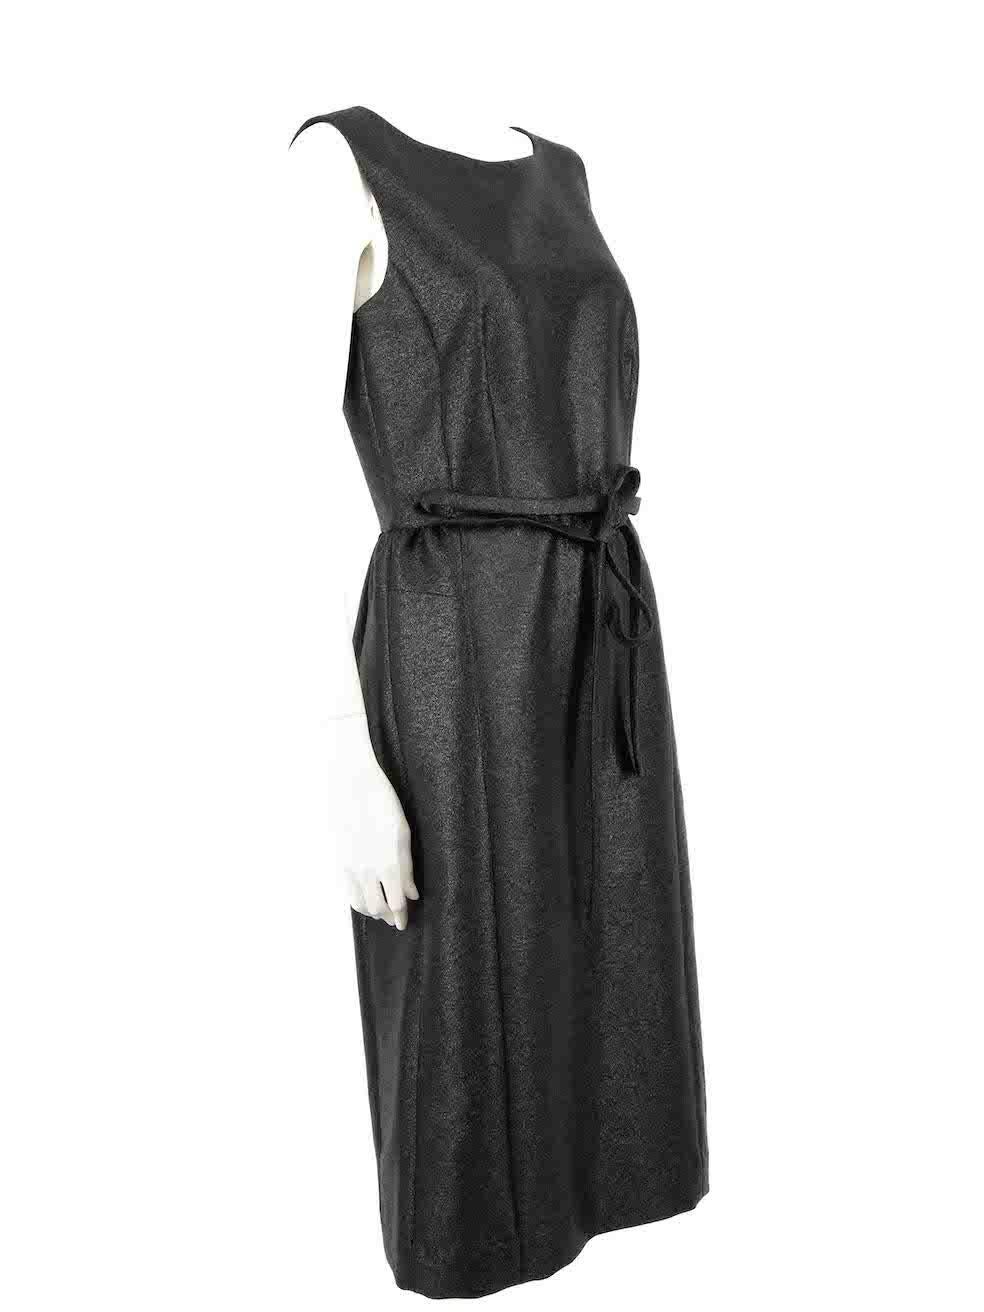 CONDITION is Very good. Minimal wear to dress is evident. Minimal wear with one front belt loop having broken on this used Marc Jacobs designer resale item.
 
 Details
 Black
 Polyester
 Midi dress
 Glitter accent
 Round neckline
 Side zip closure